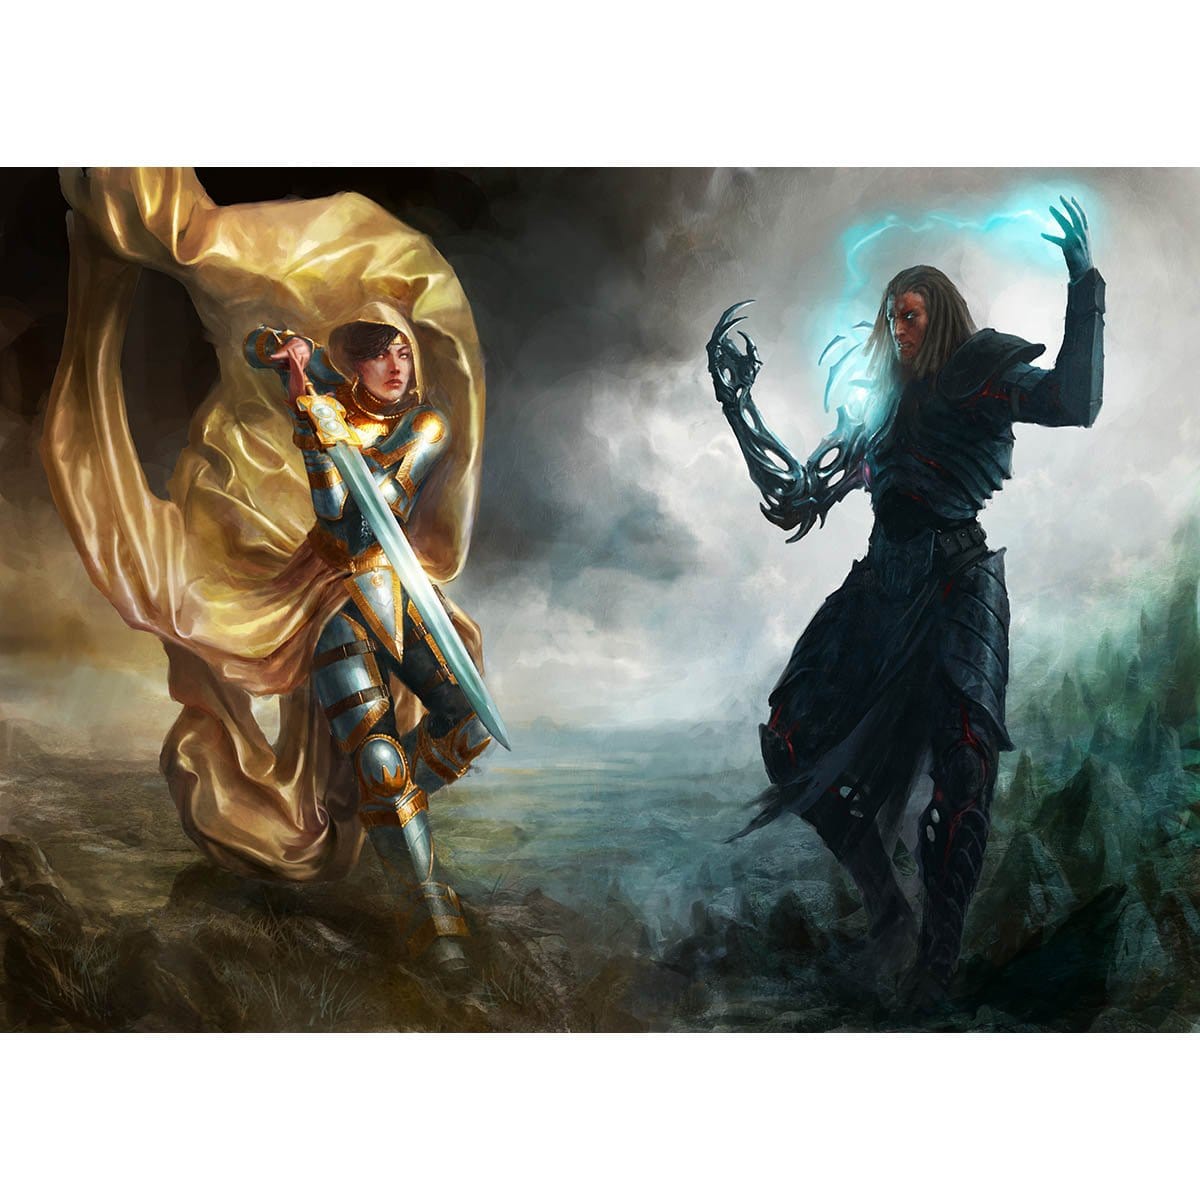 Elspeth vs. Tezzeret Print - Print - Original Magic Art - Accessories for Magic the Gathering and other card games